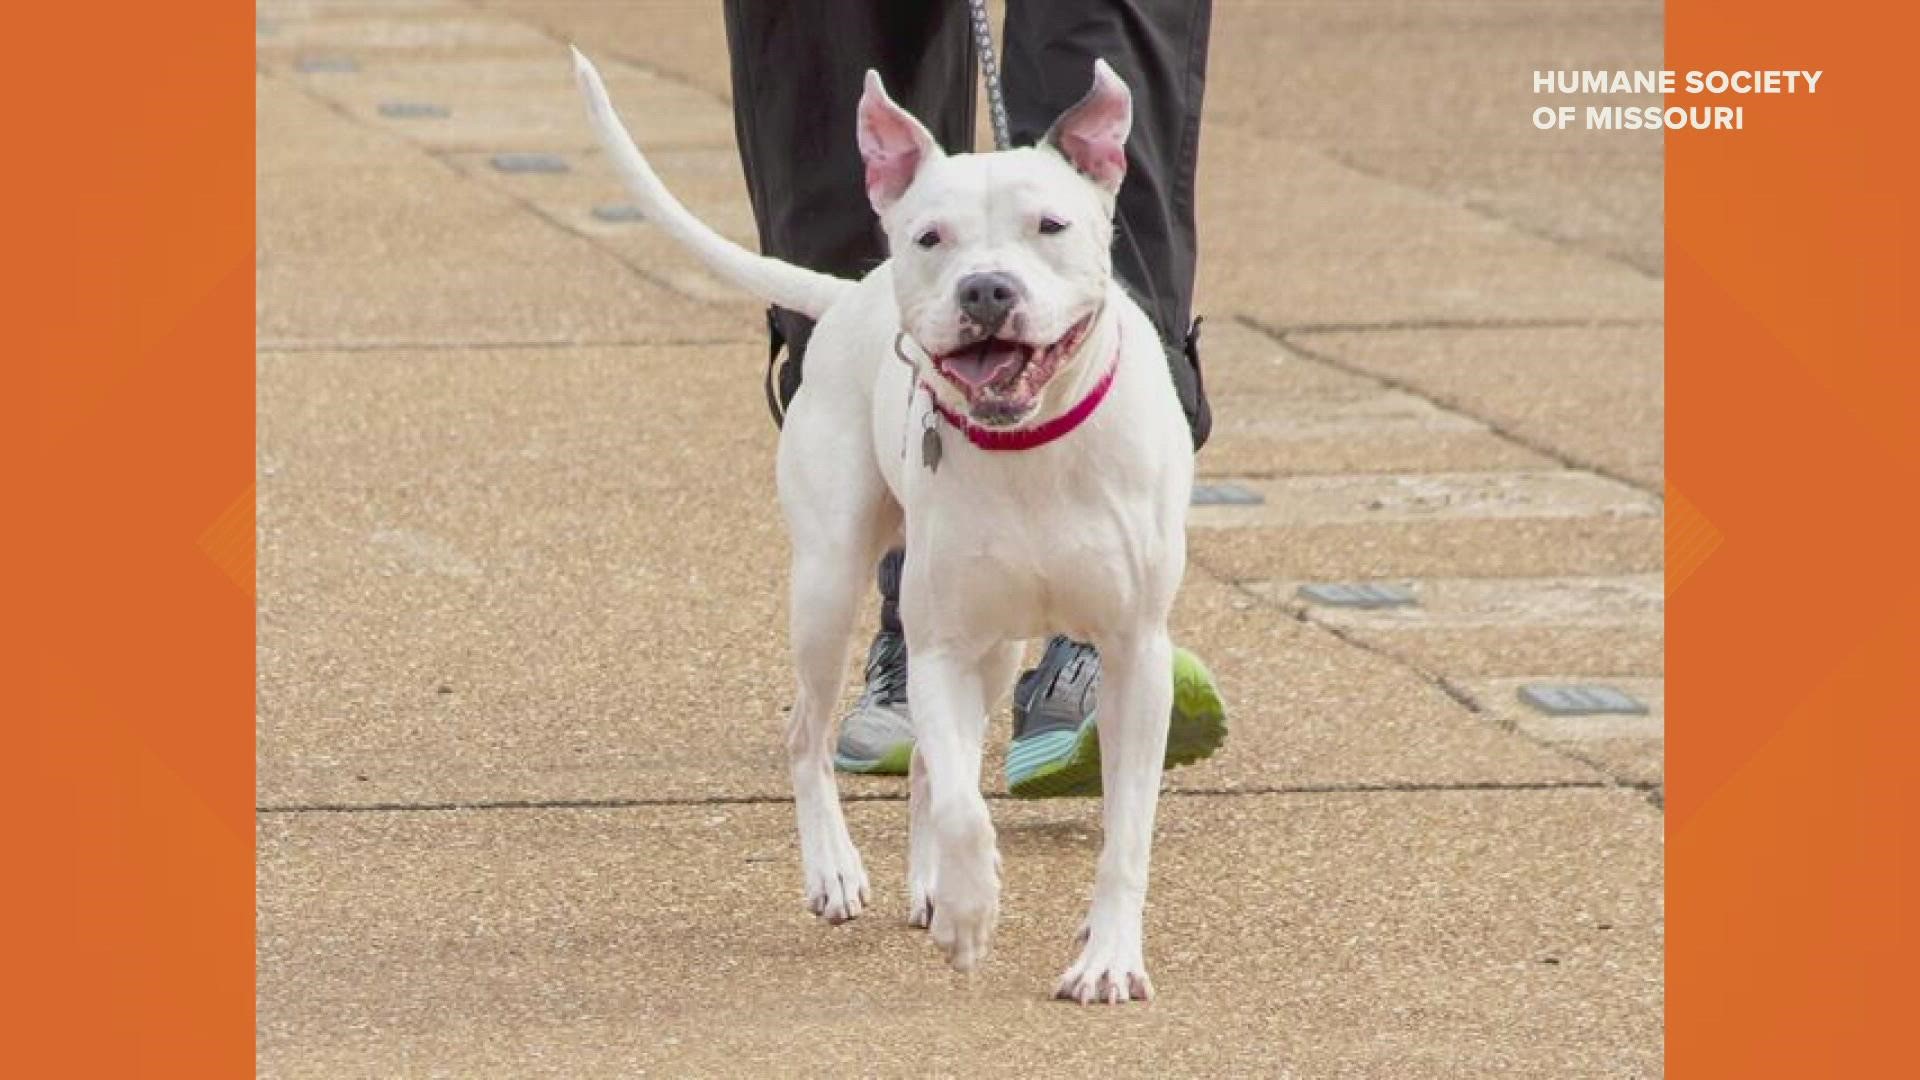 Through August, interested adopters can adopt adult pit bull terriers and pit bull mixed breeds for a reduced adoption fee of $25.